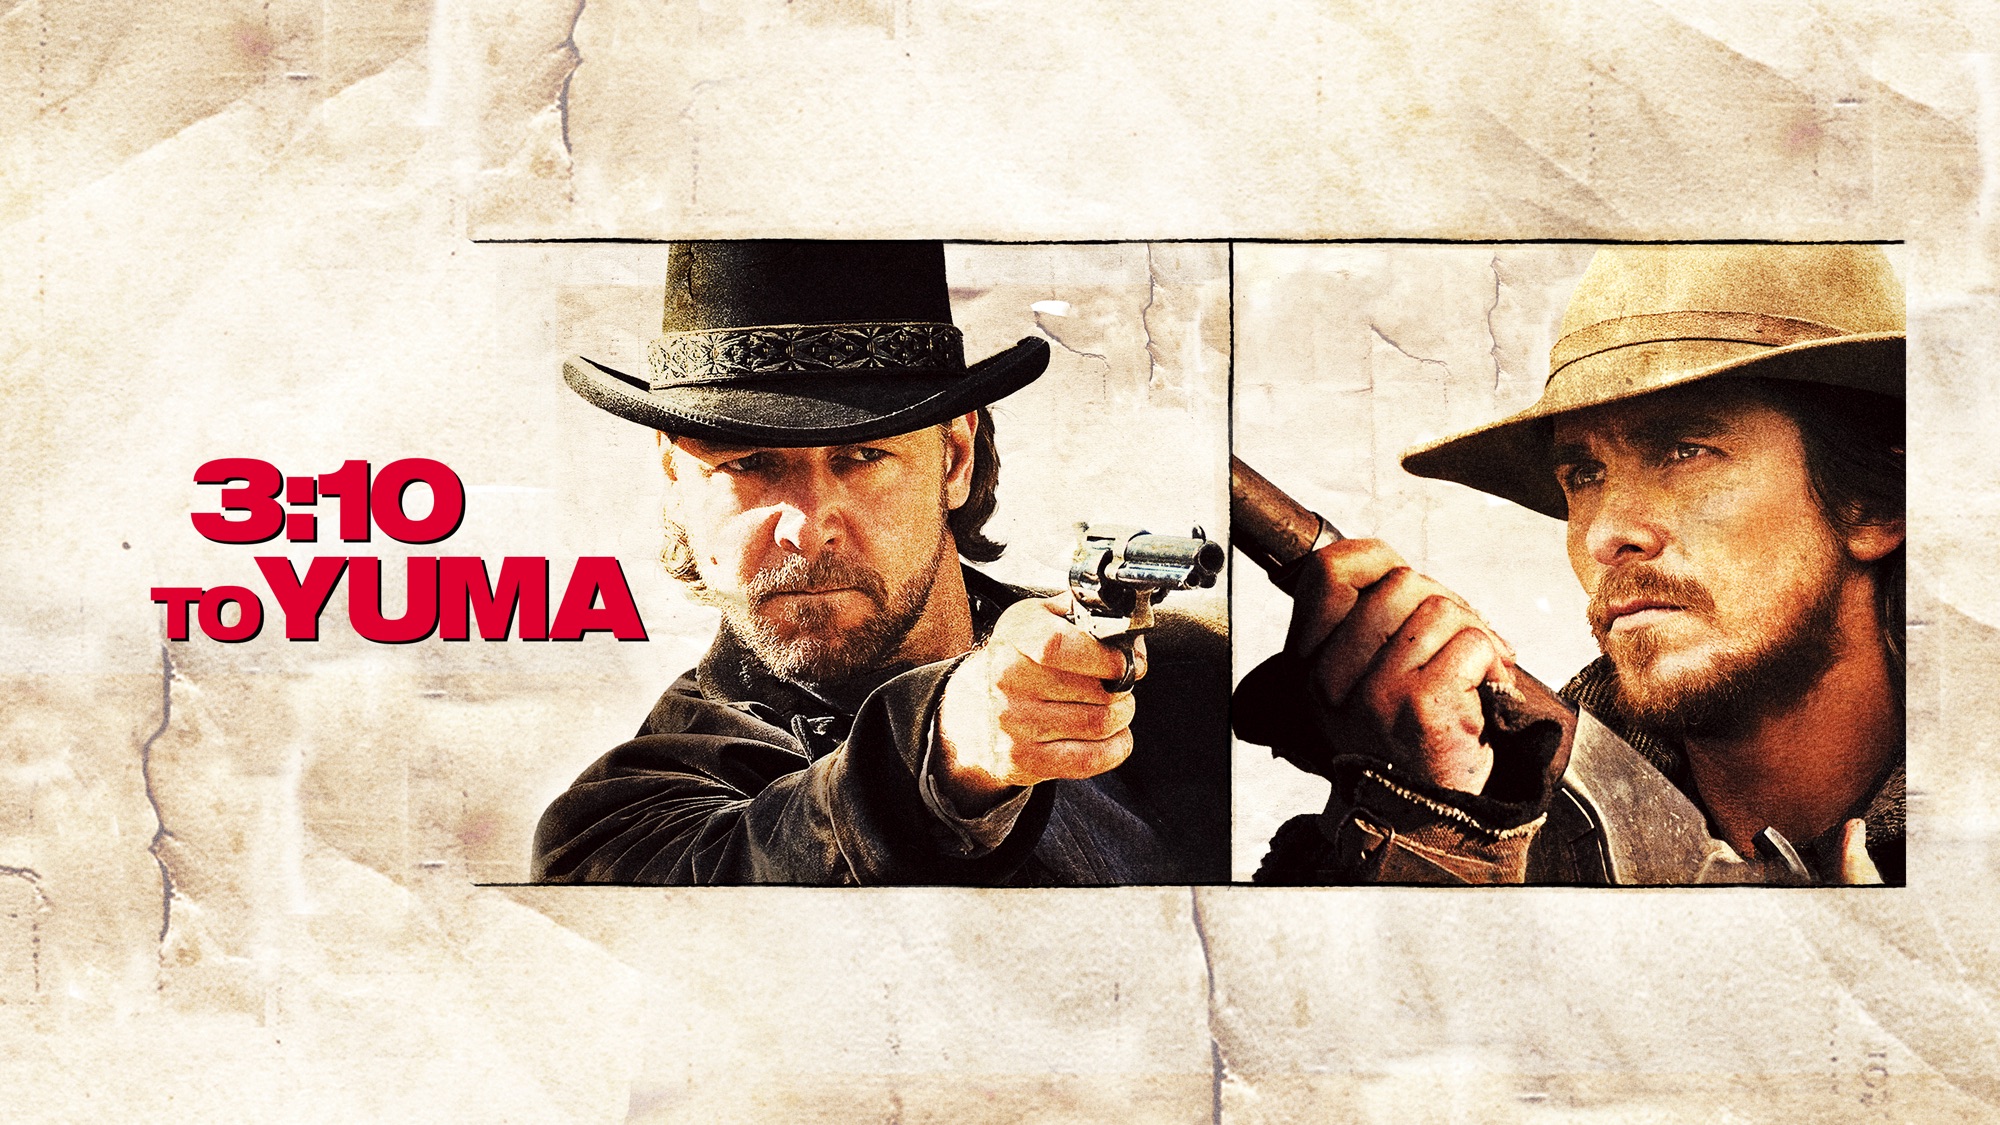 movie, 3:10 to yuma (2007), christian bale, russell crowe